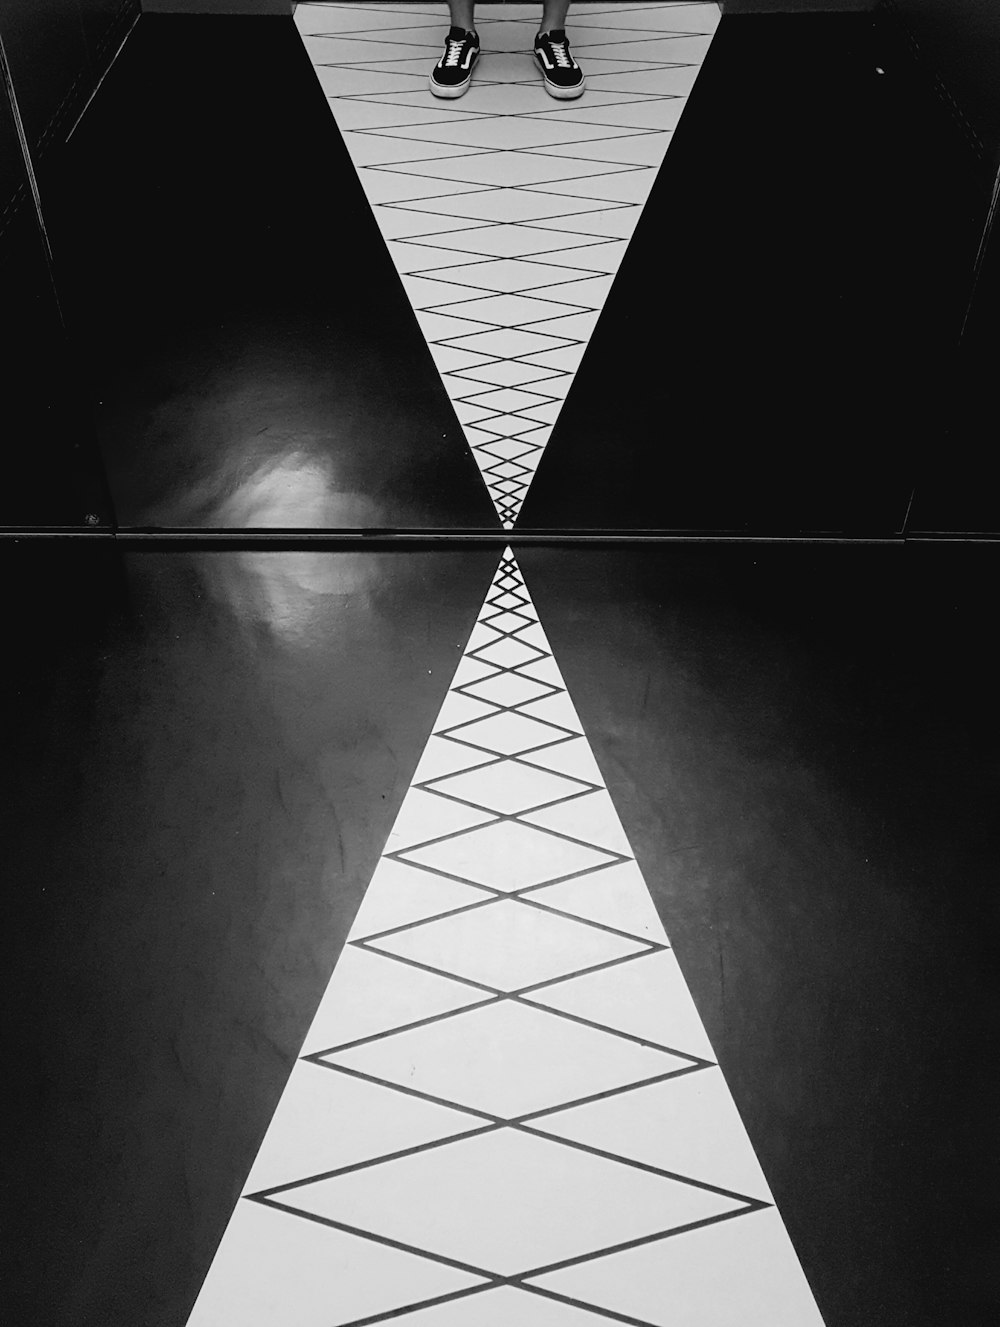 a black and white photo of a person standing on a tiled floor